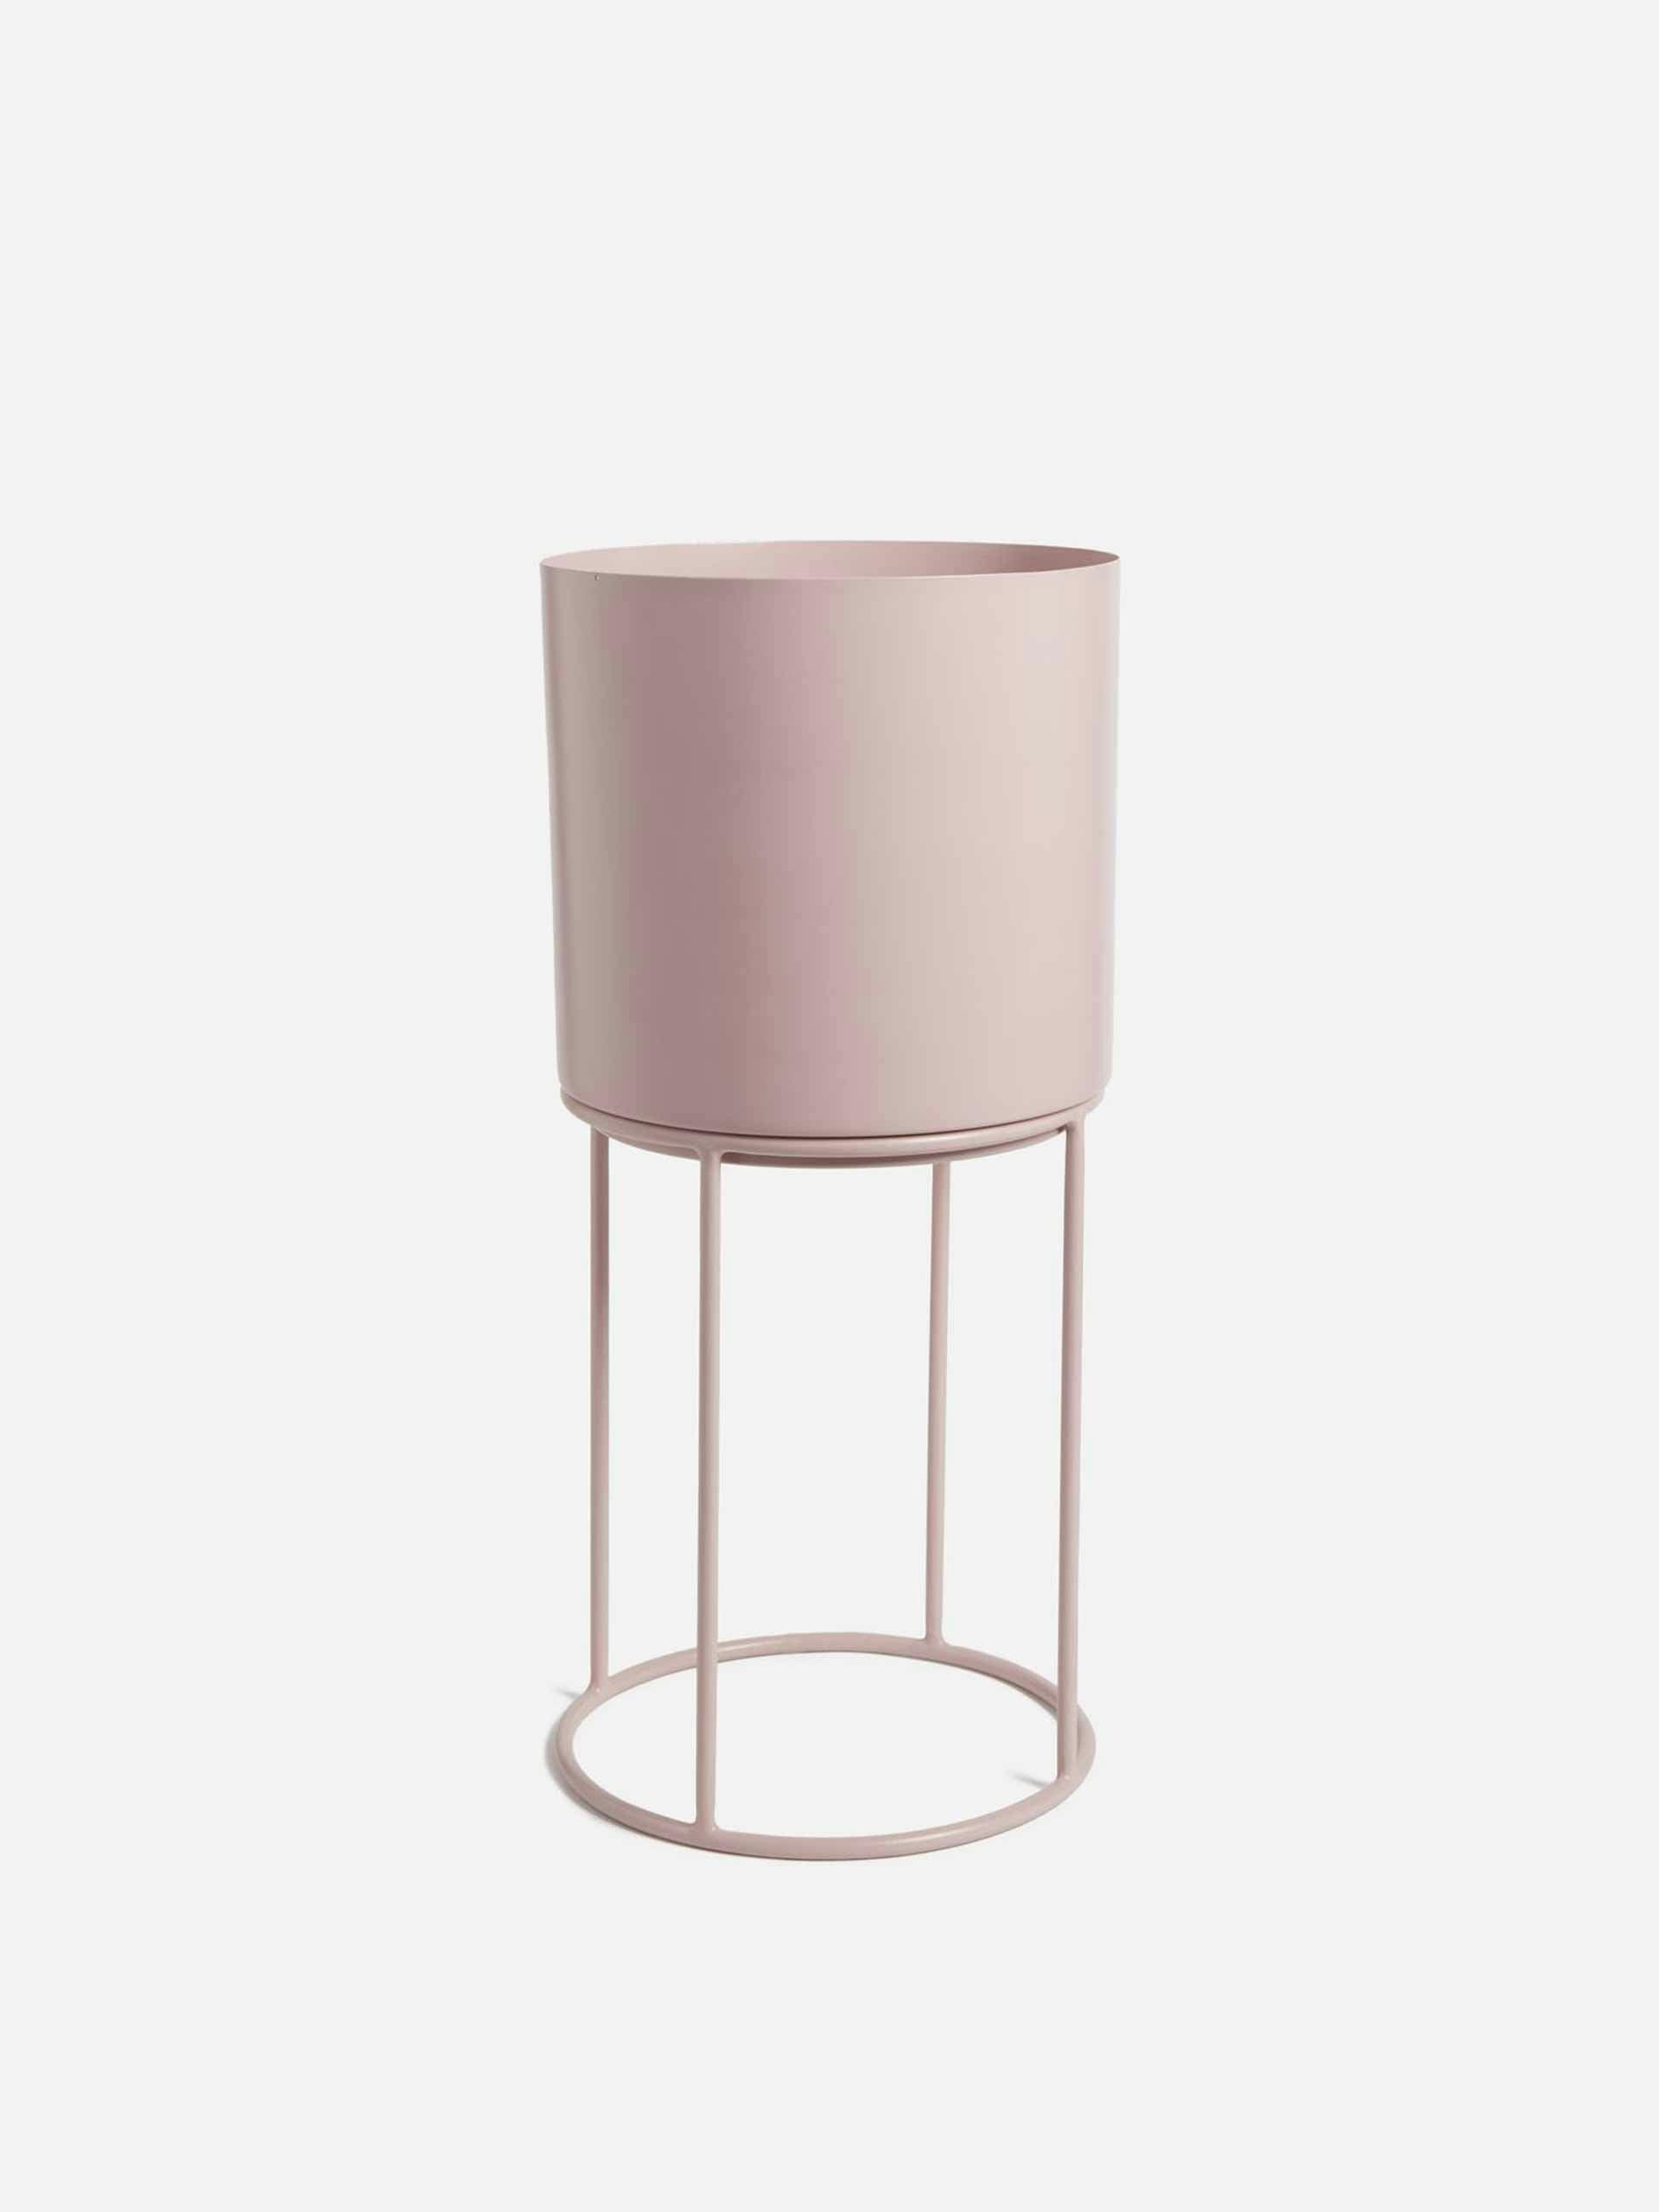 Planter with stand